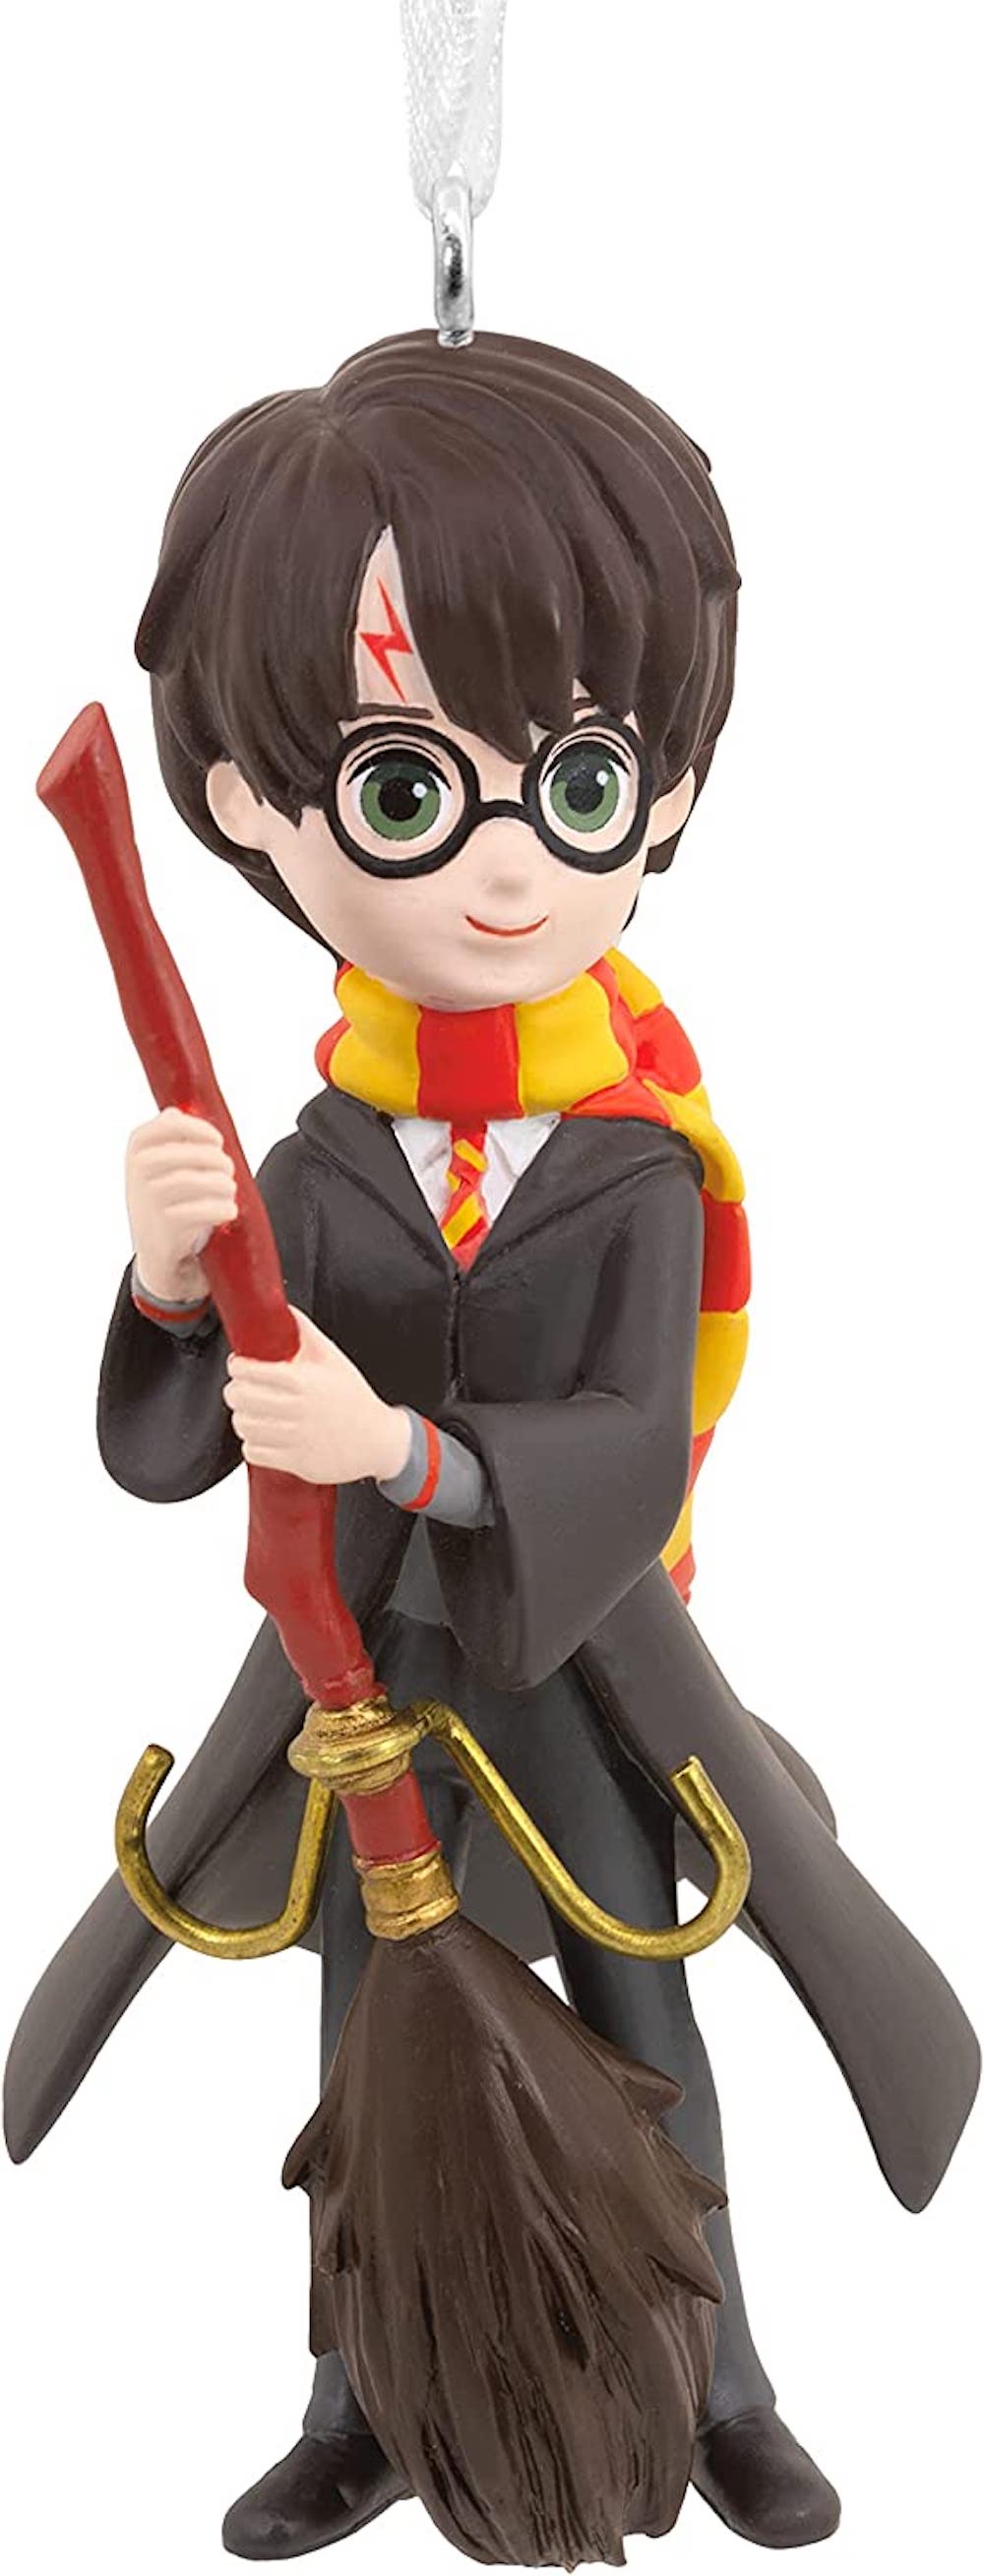 Hallmark Harry Potter on Broomstick Christmas Ornament New with Box